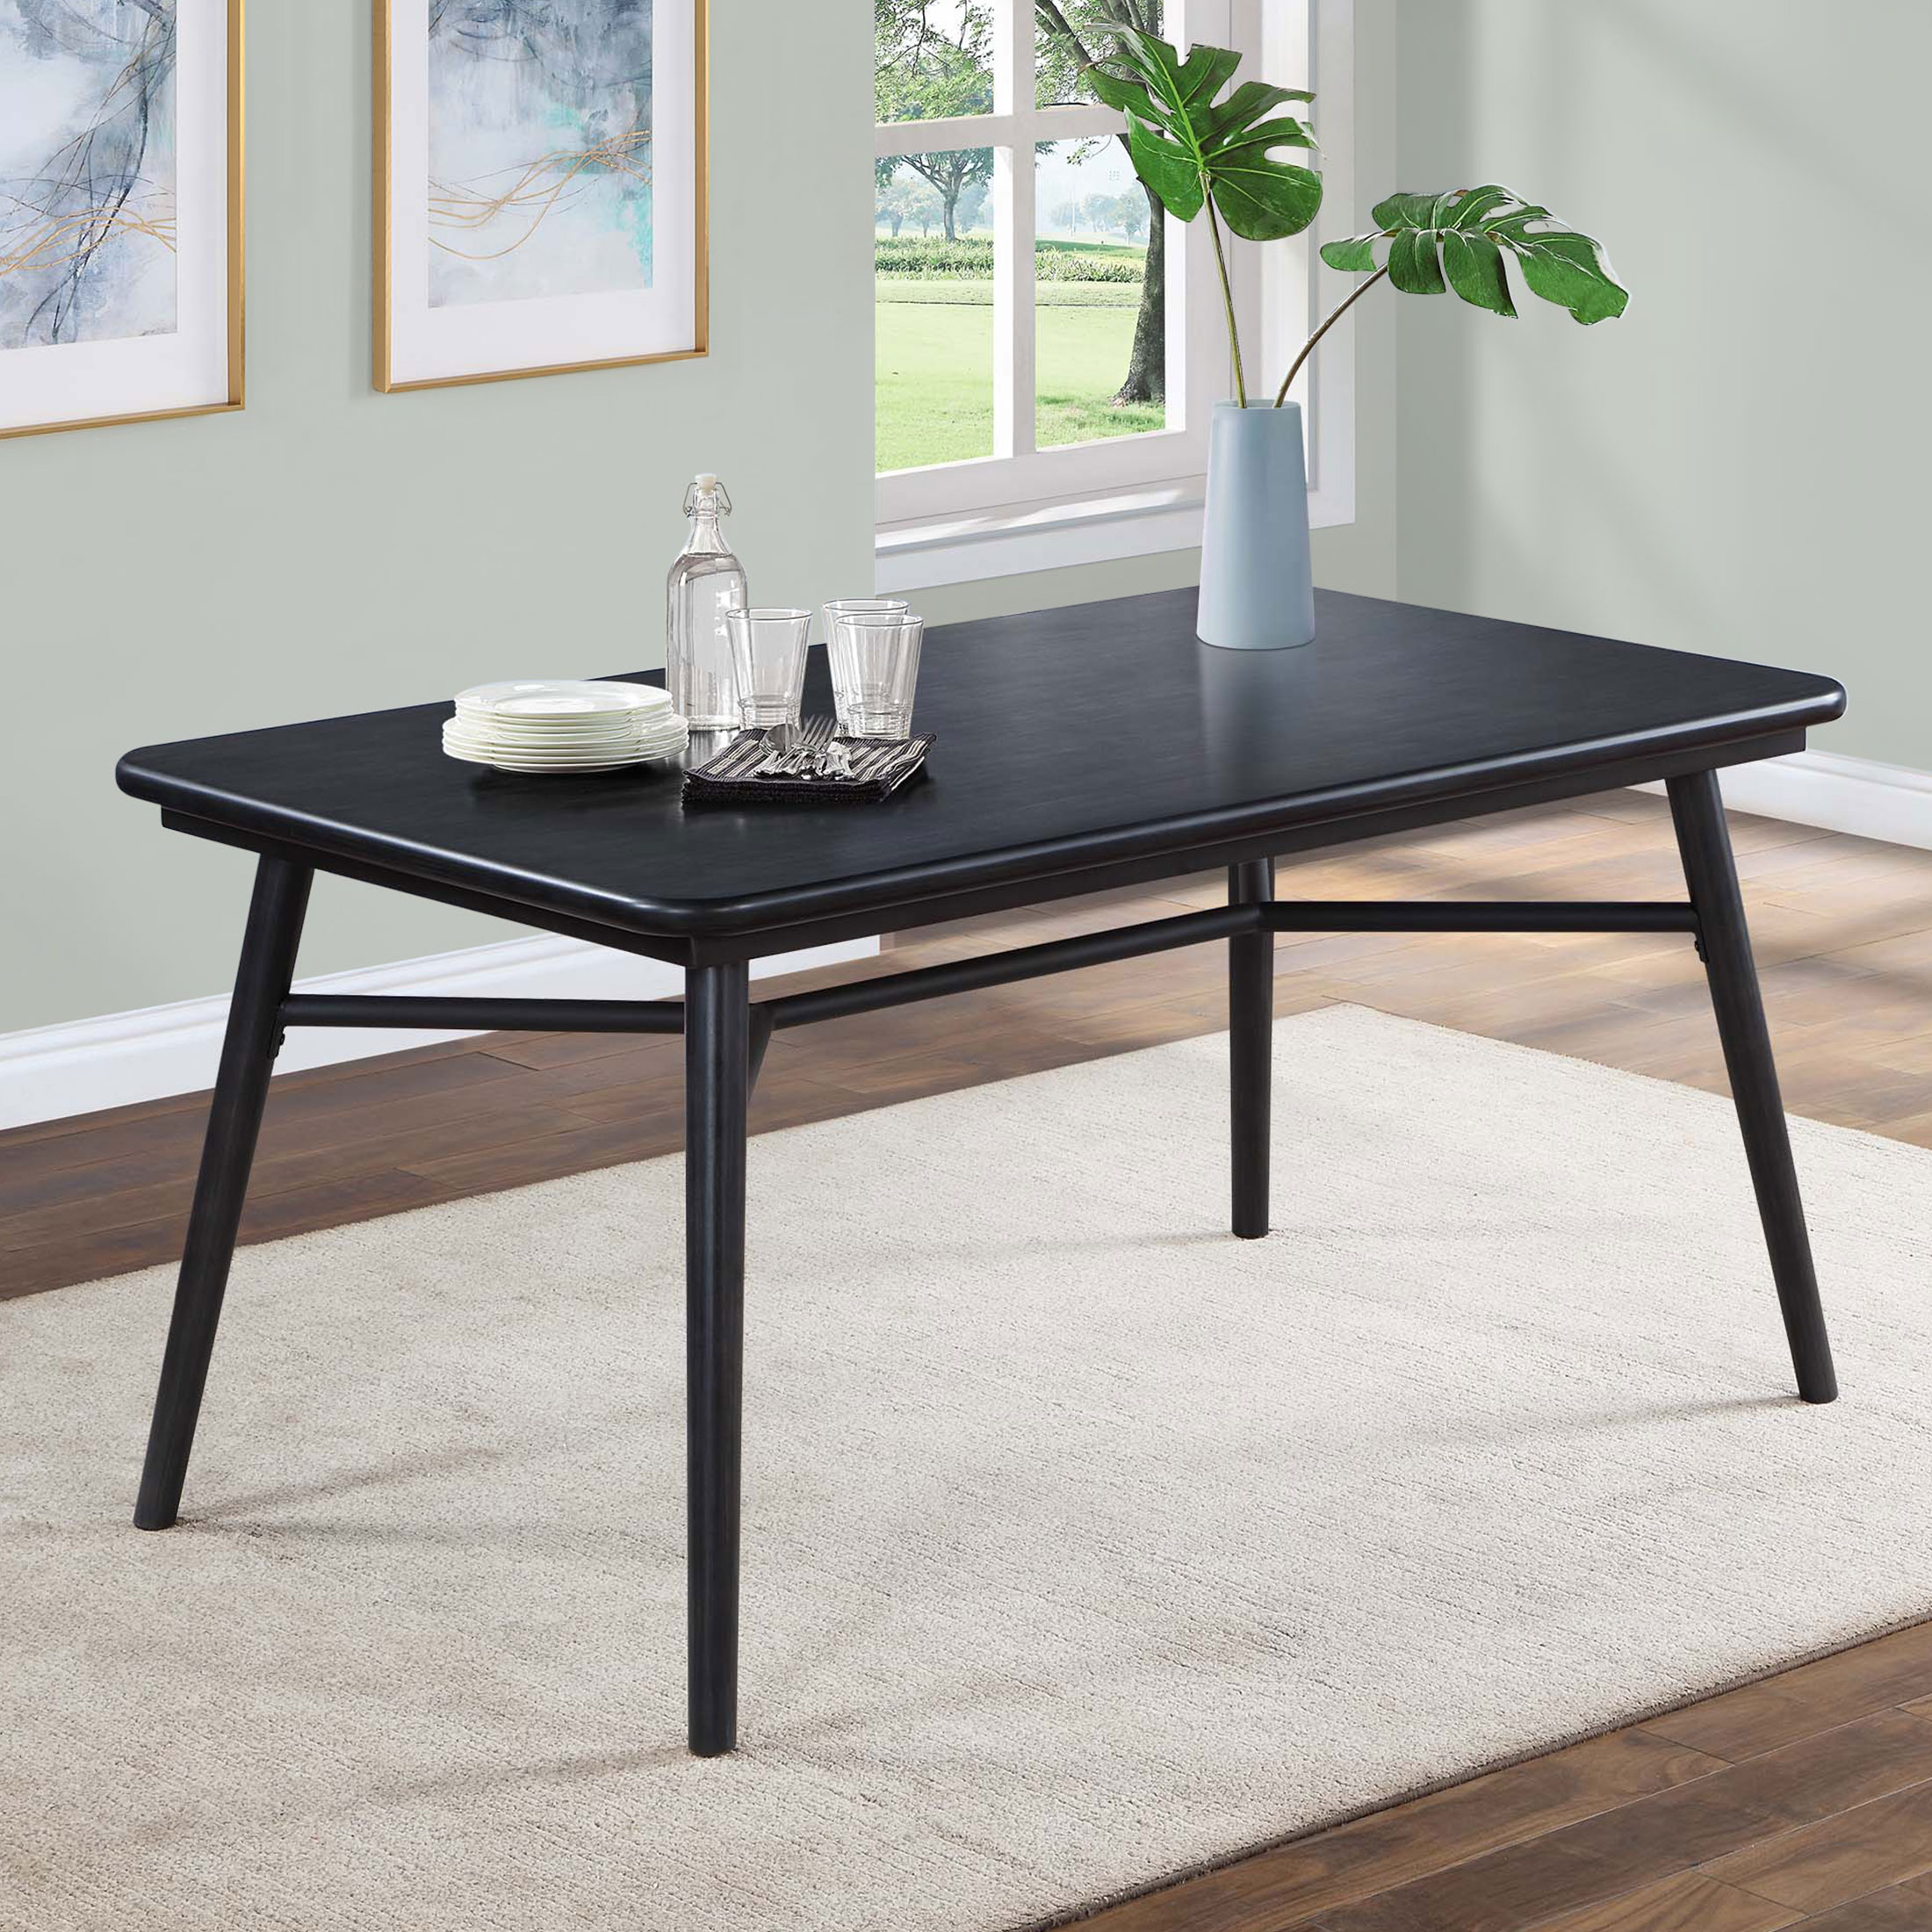 Better Homes & Gardens Springwood Dining Table, Charcoal - image 1 of 15